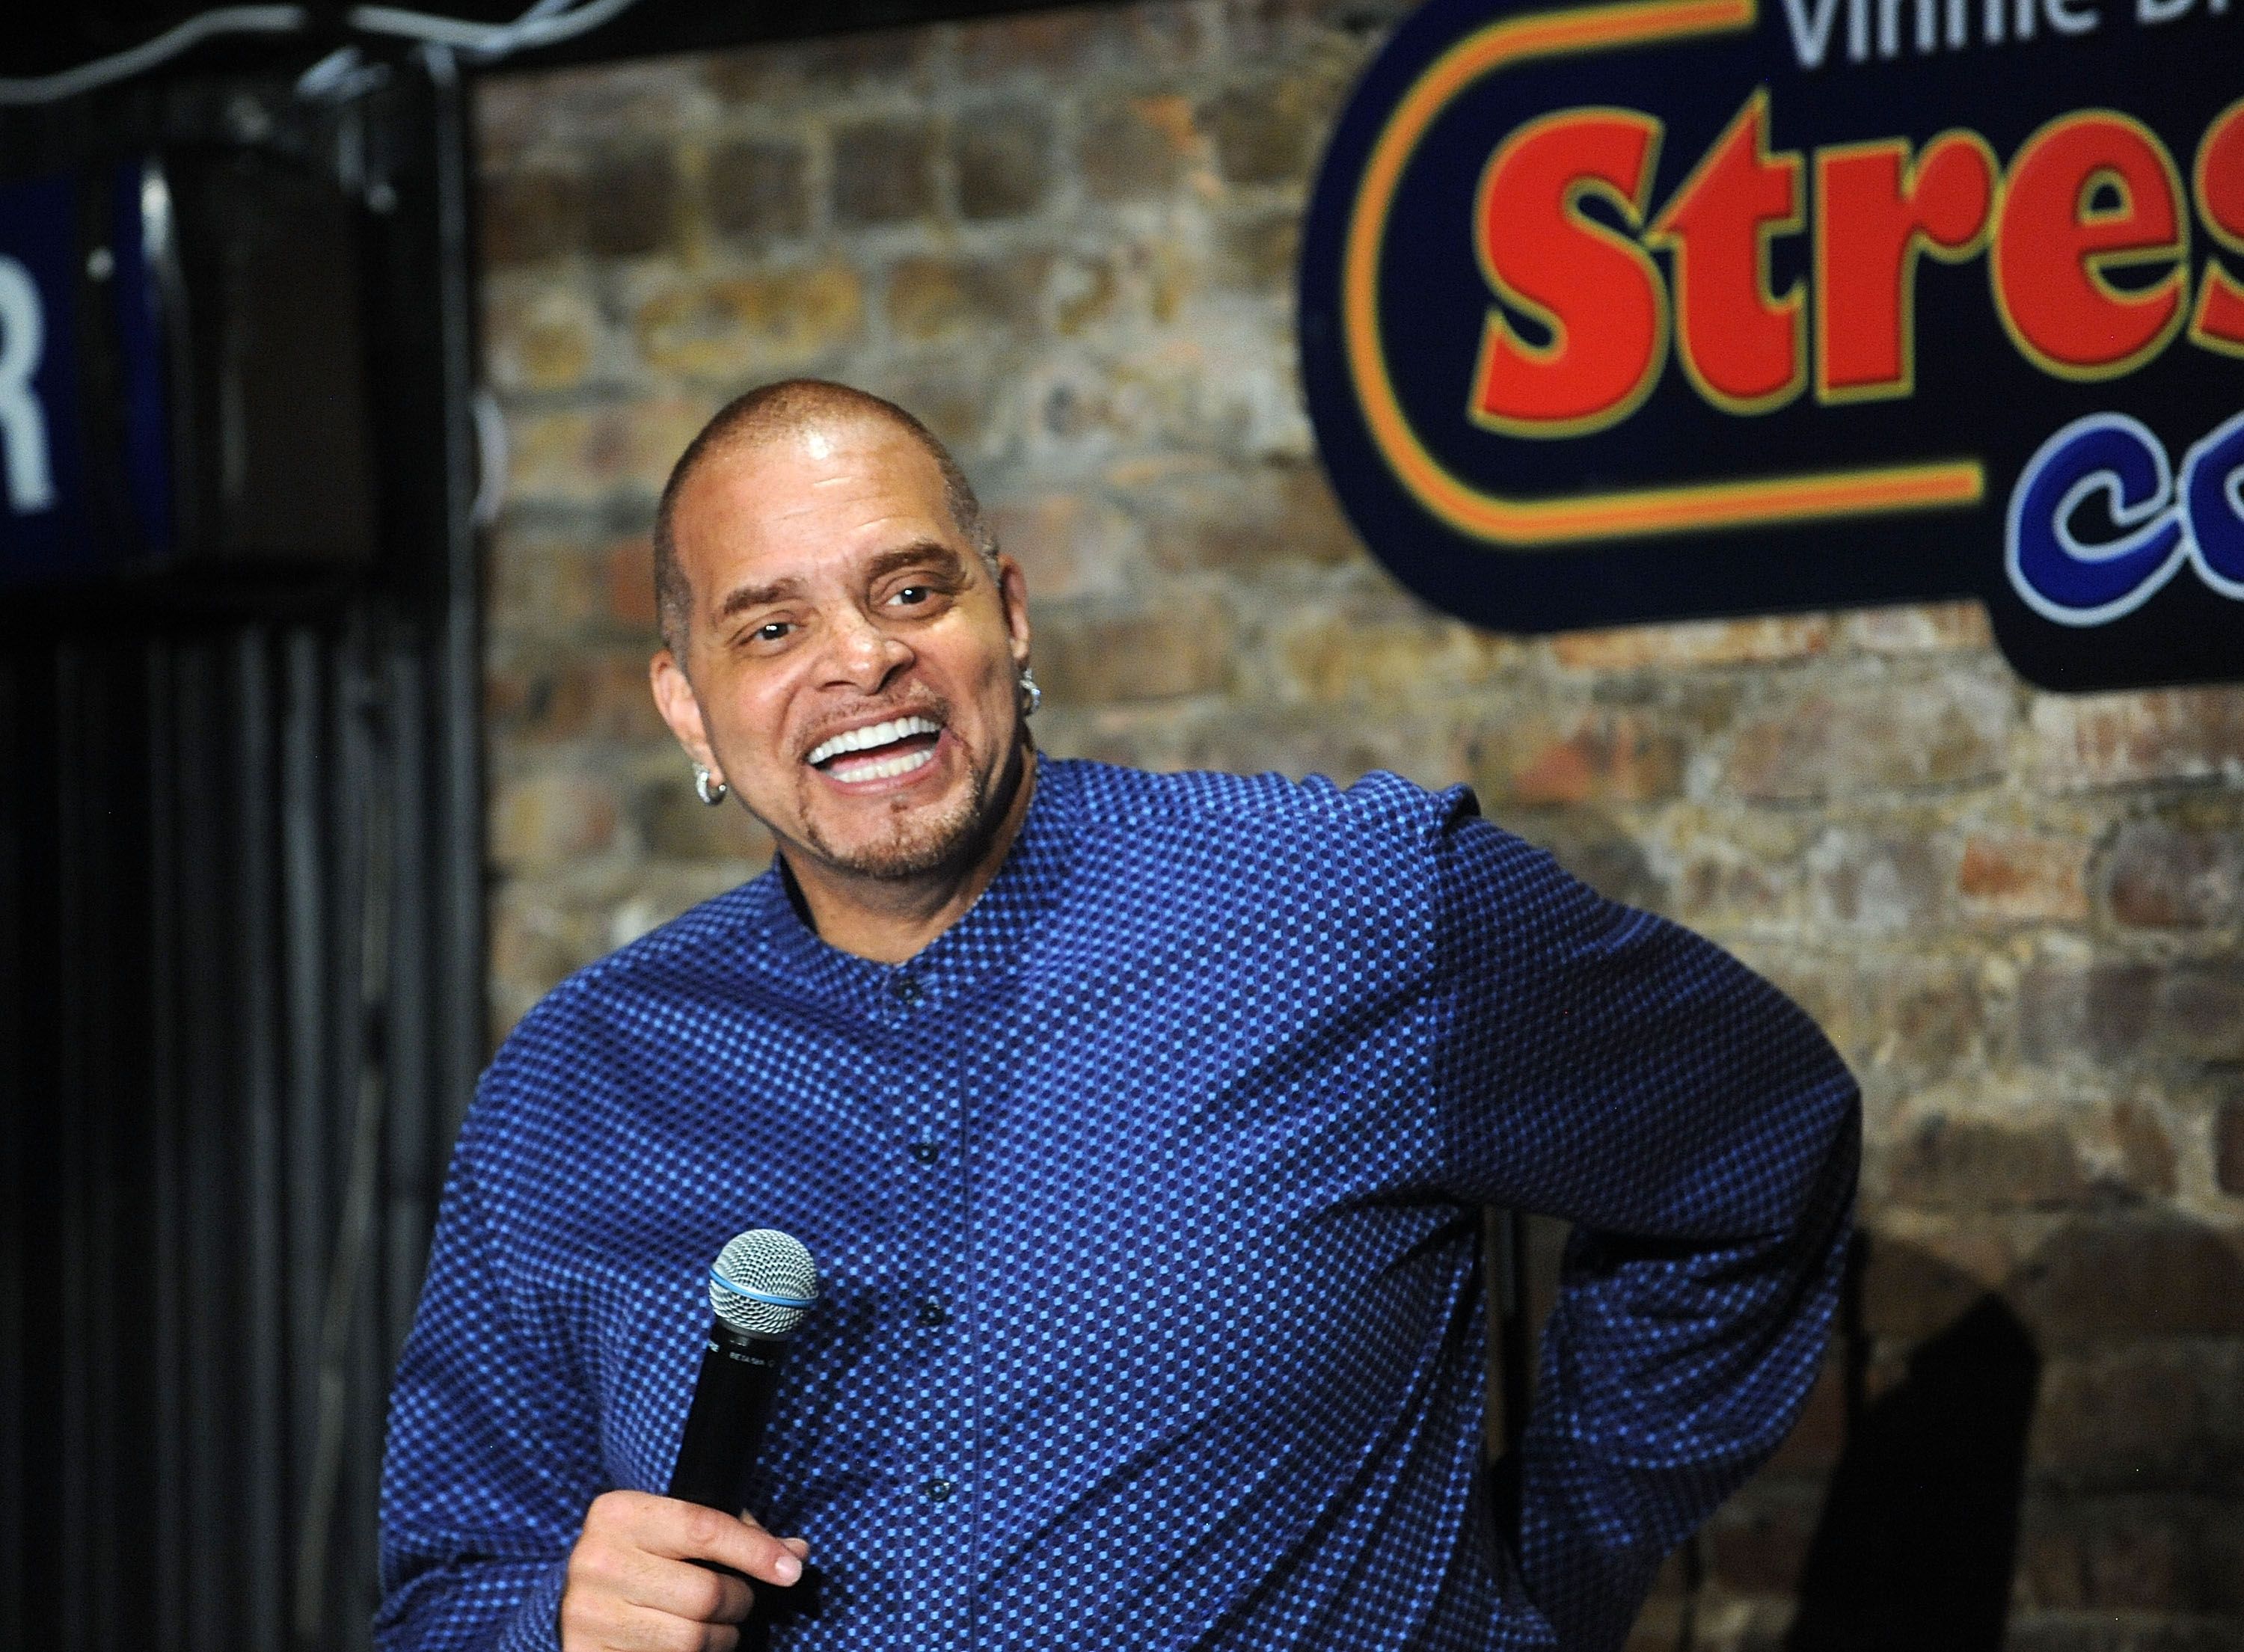 Quick Facts about the Life of Comedian Sinbad, 64, Who Recently